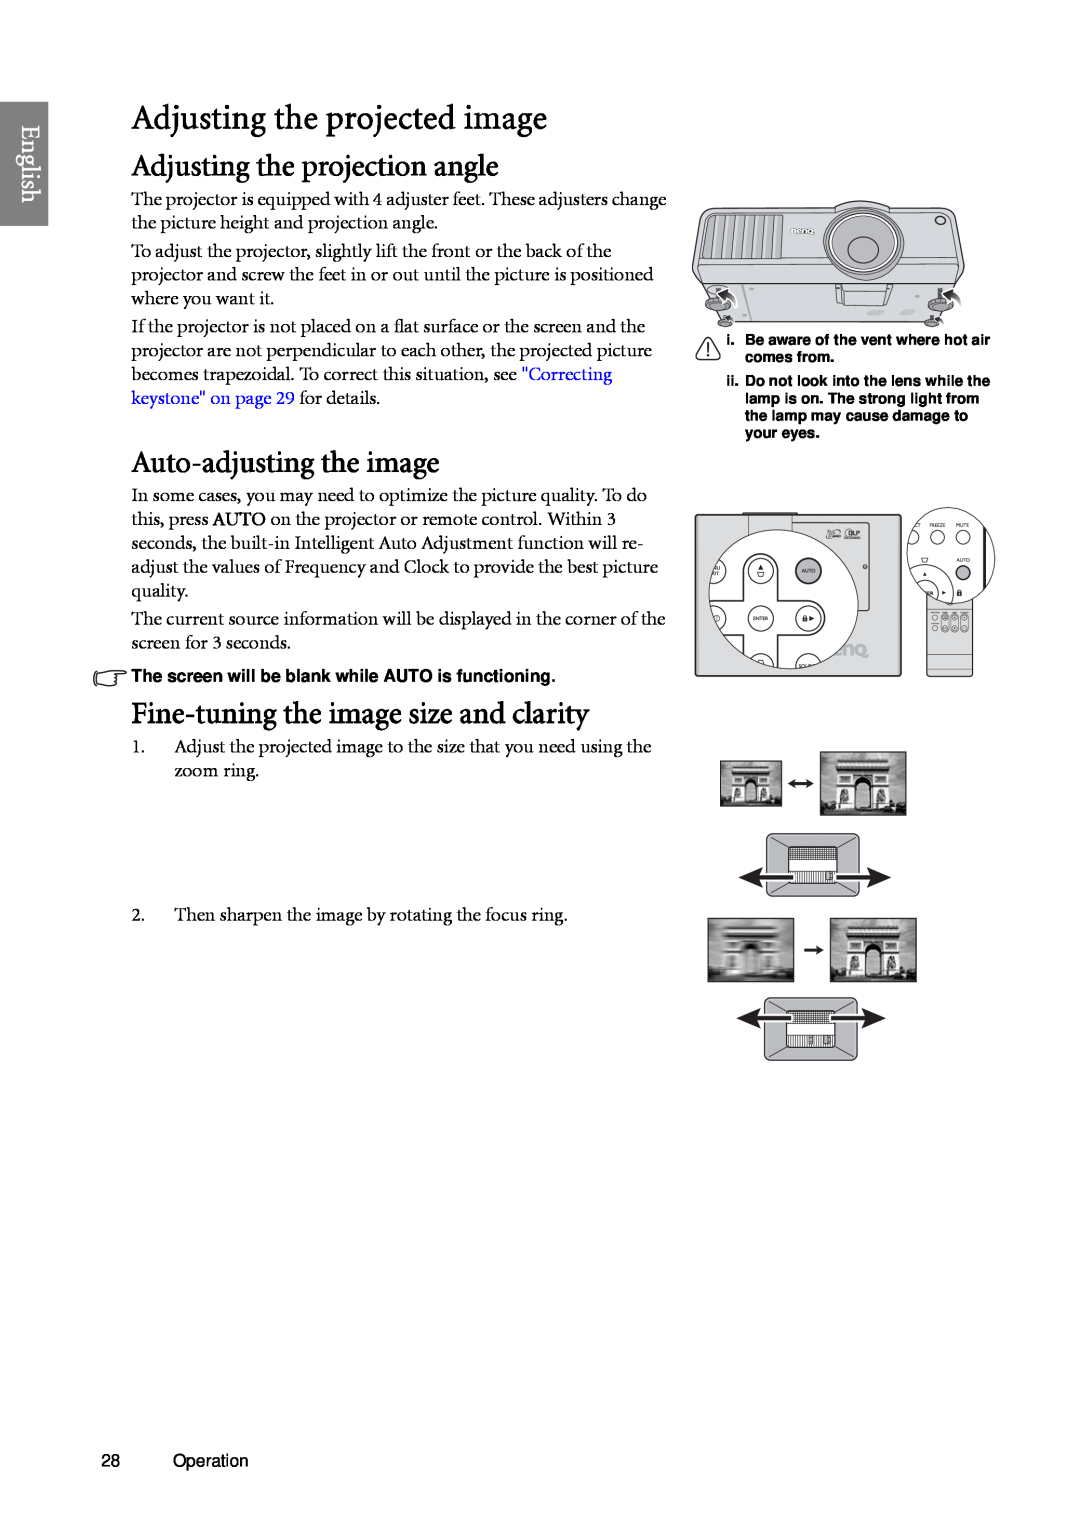 BenQ SP920 user manual Adjusting the projected image, Adjusting the projection angle, Auto-adjusting the image, English 